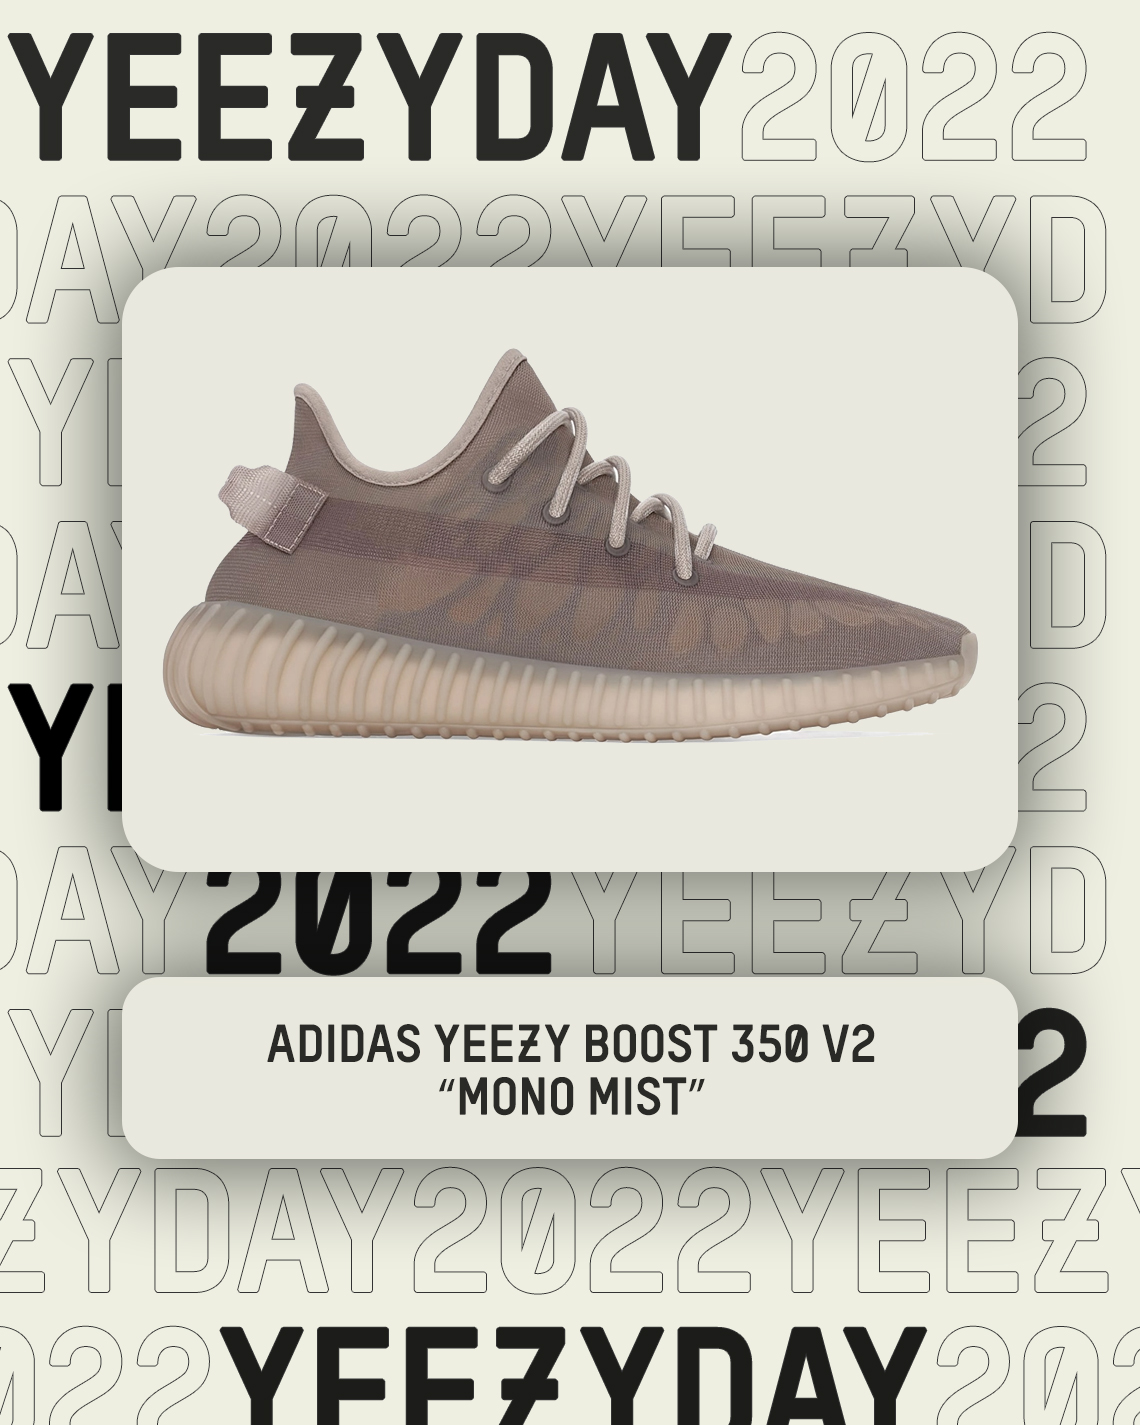 YEEZY DAY 2022 Releases August 2nd & 3rd